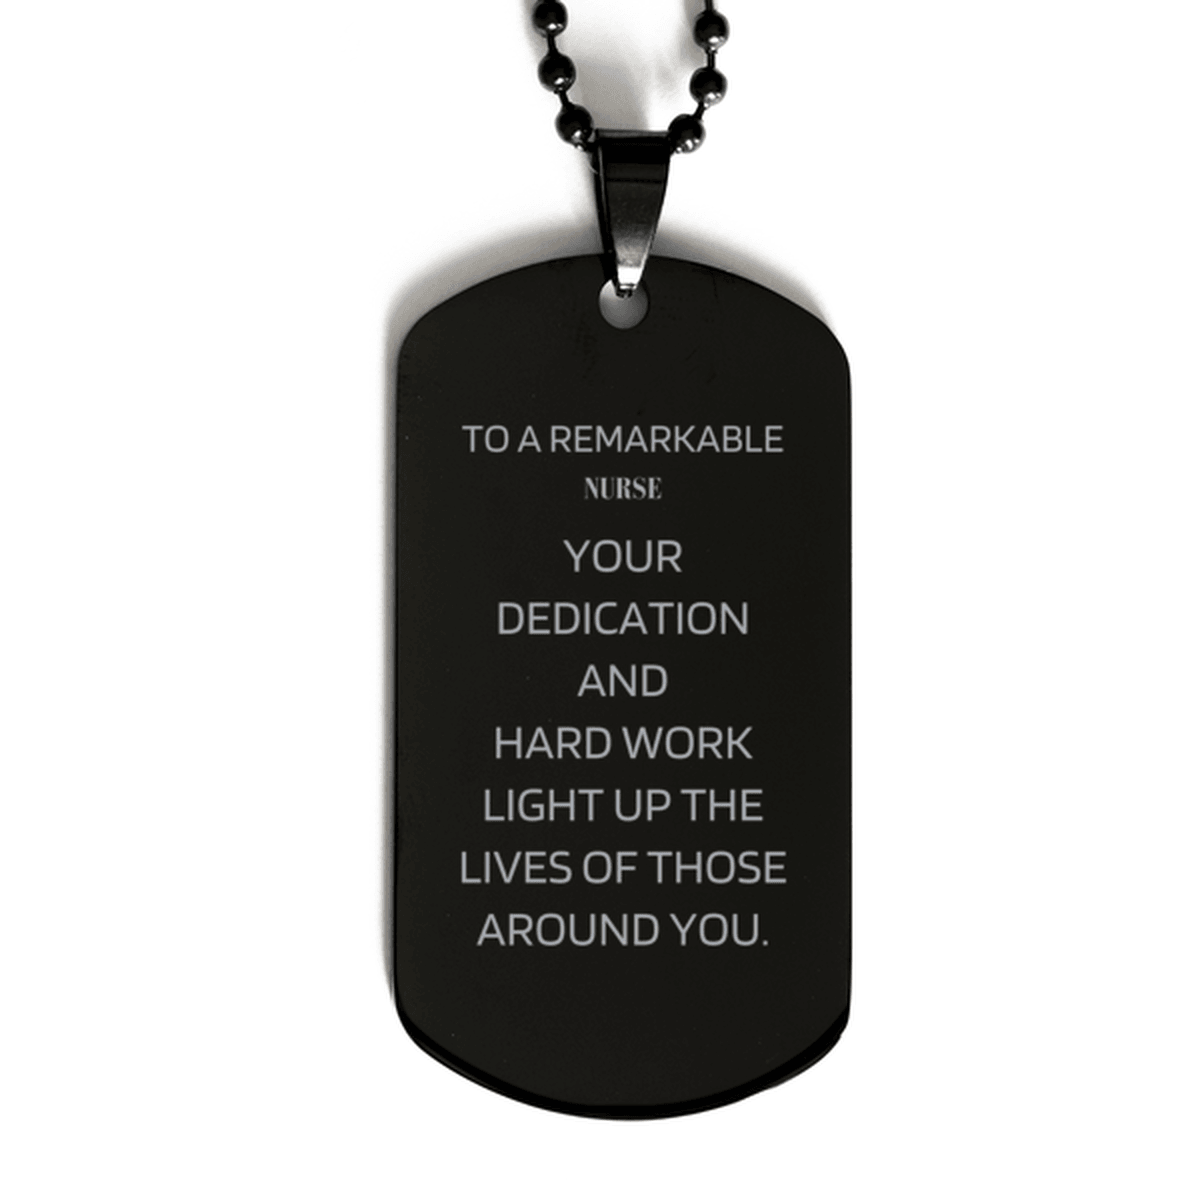 Remarkable Nurse Gifts, Your dedication and hard work, Inspirational Birthday Christmas Unique Black Dog Tag For Nurse, Coworkers, Men, Women, Friends - Mallard Moon Gift Shop